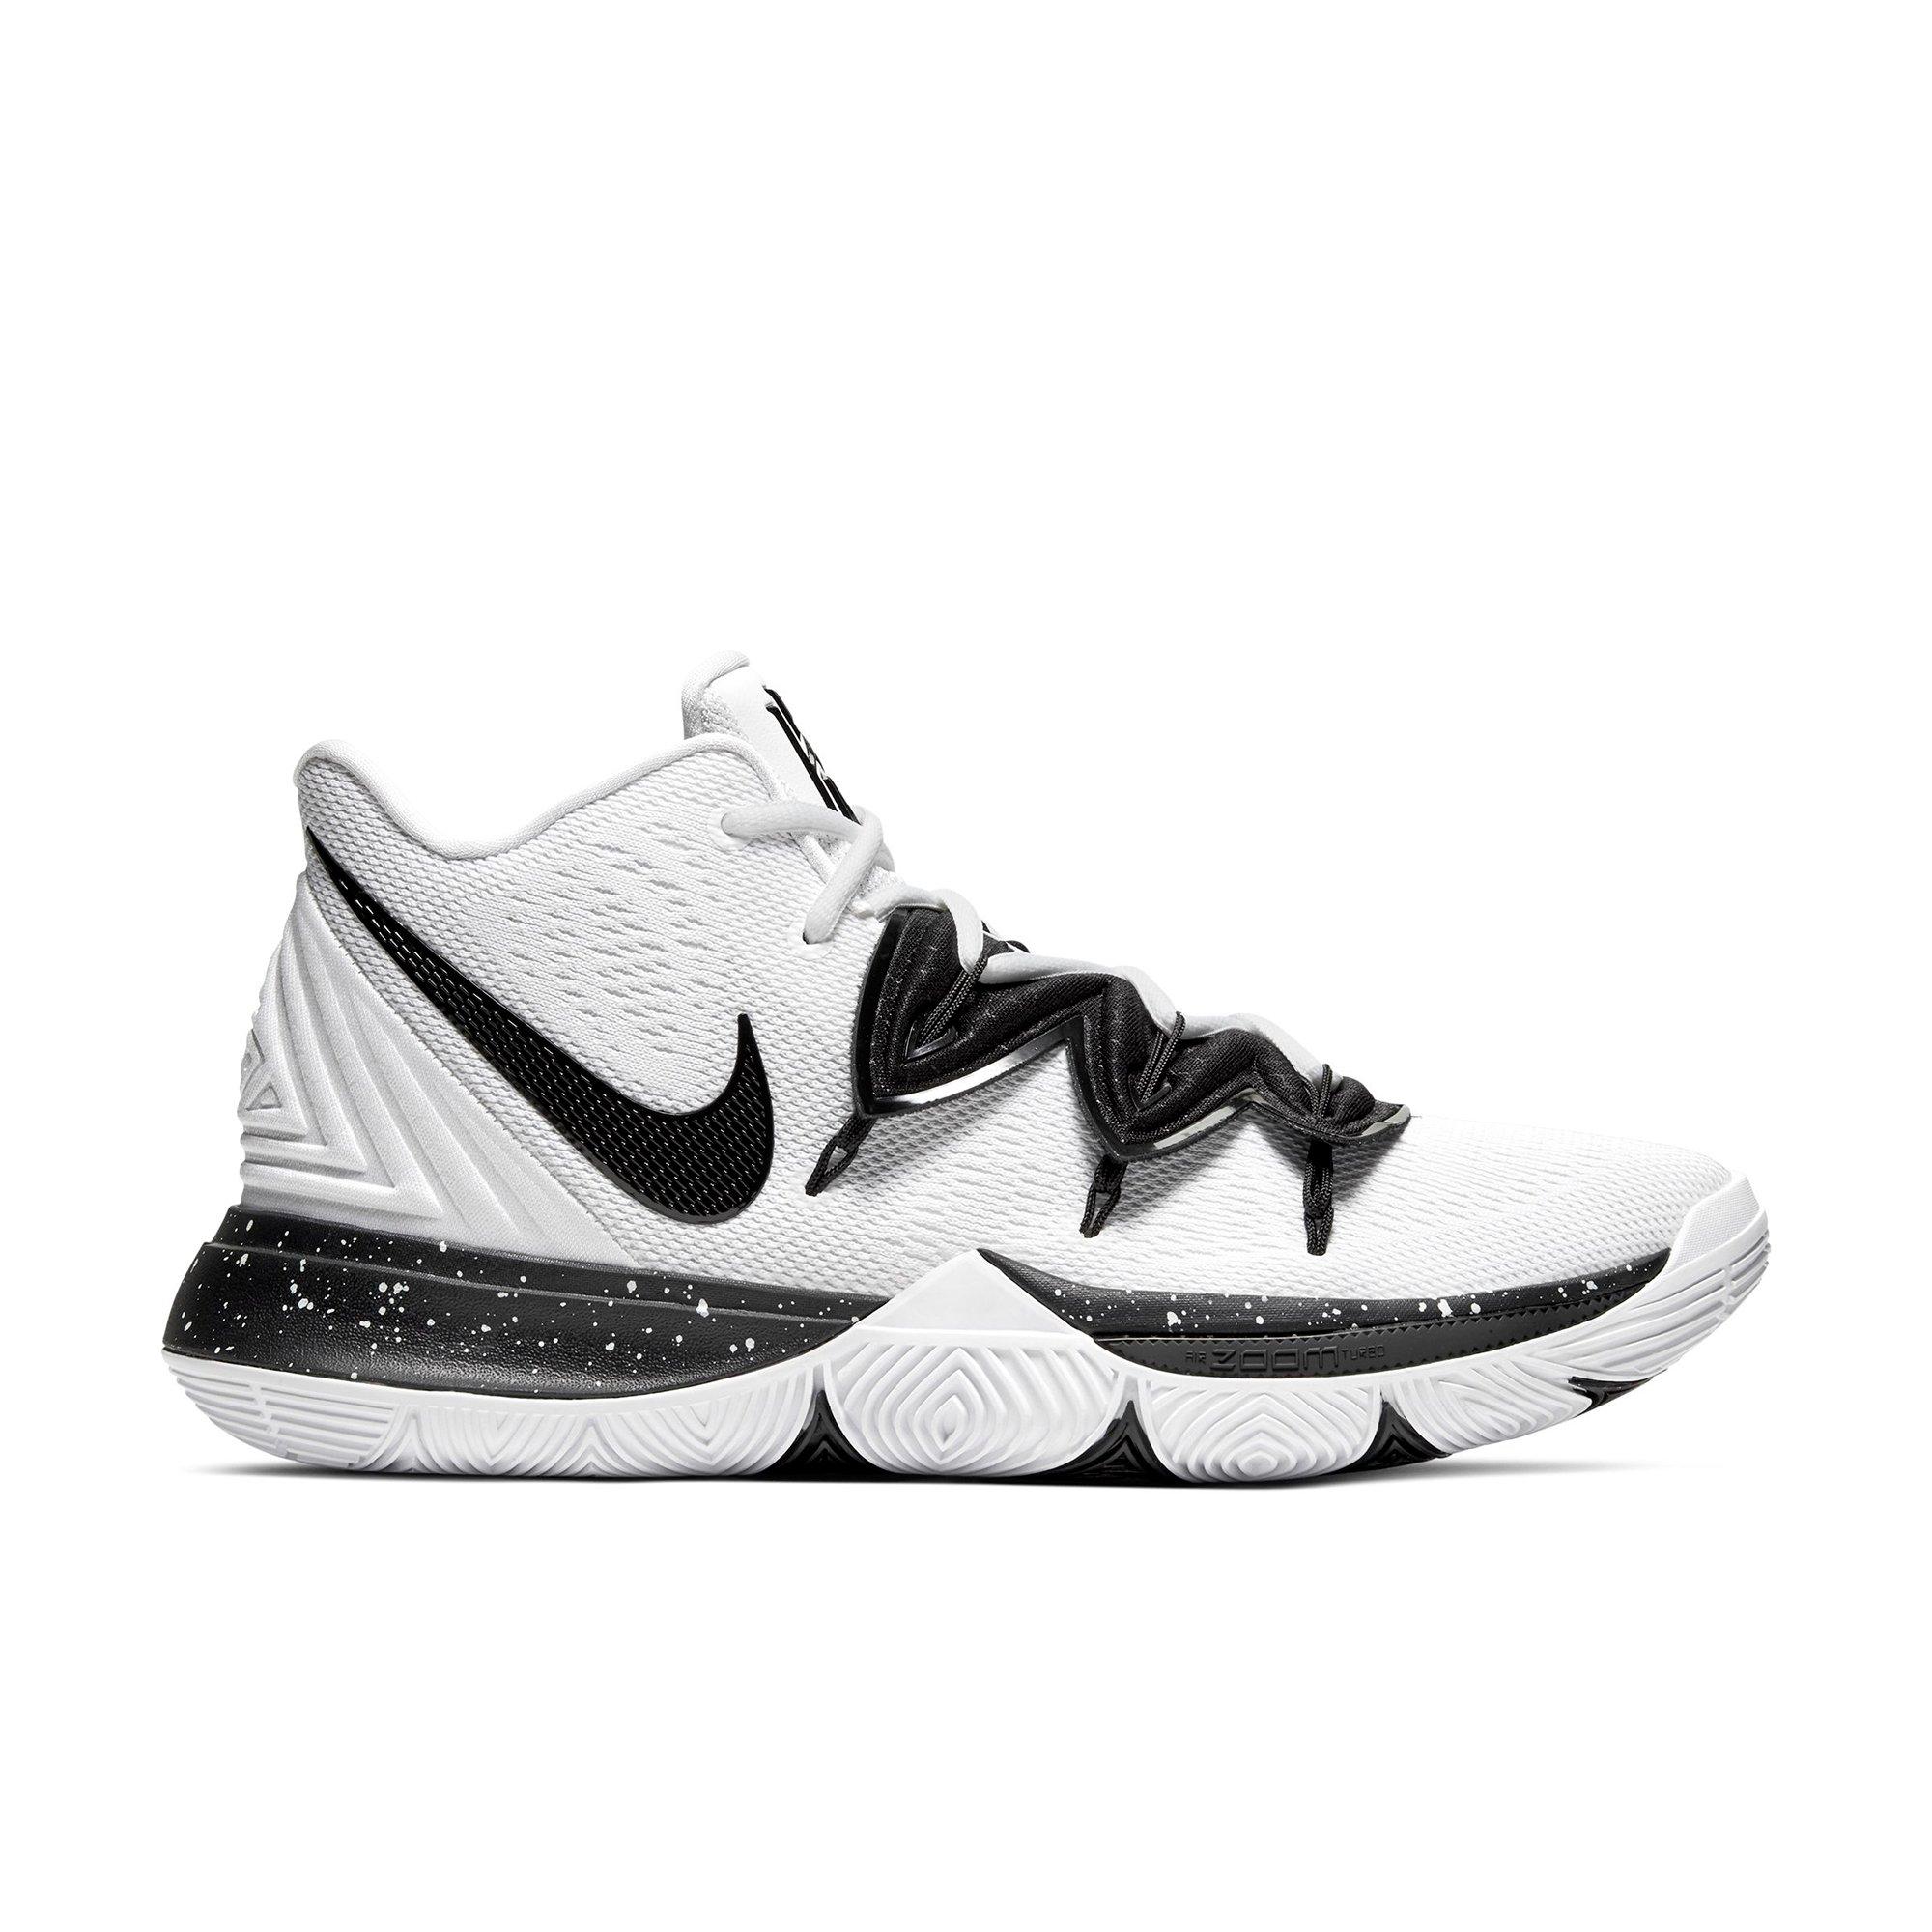 kyrie black and white